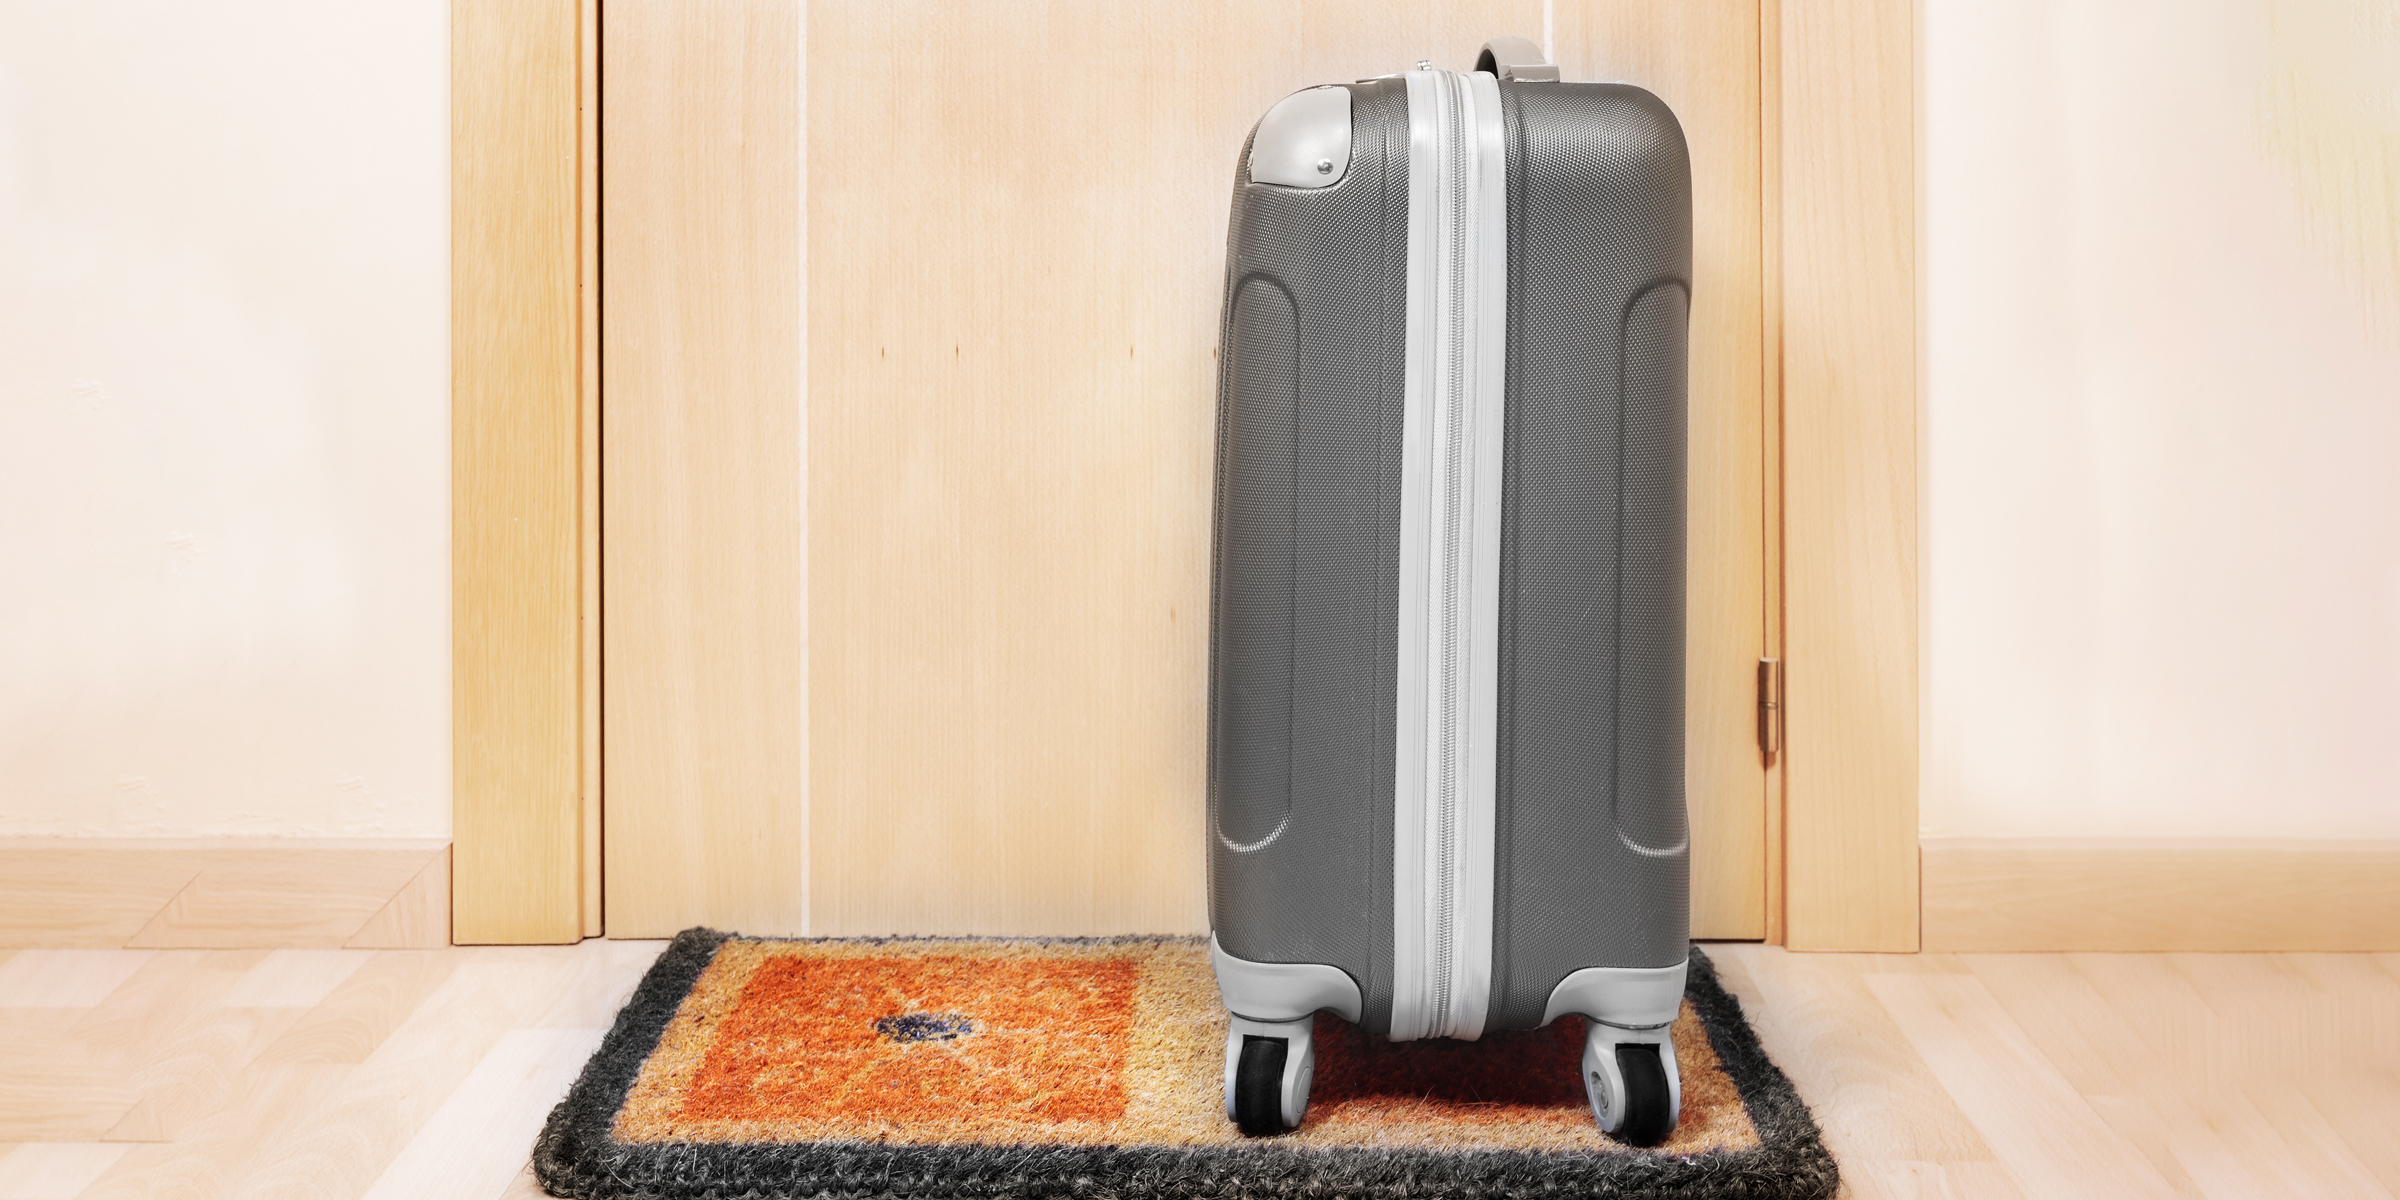 A suitcase lying on a doorstep | Source: Shutterstock